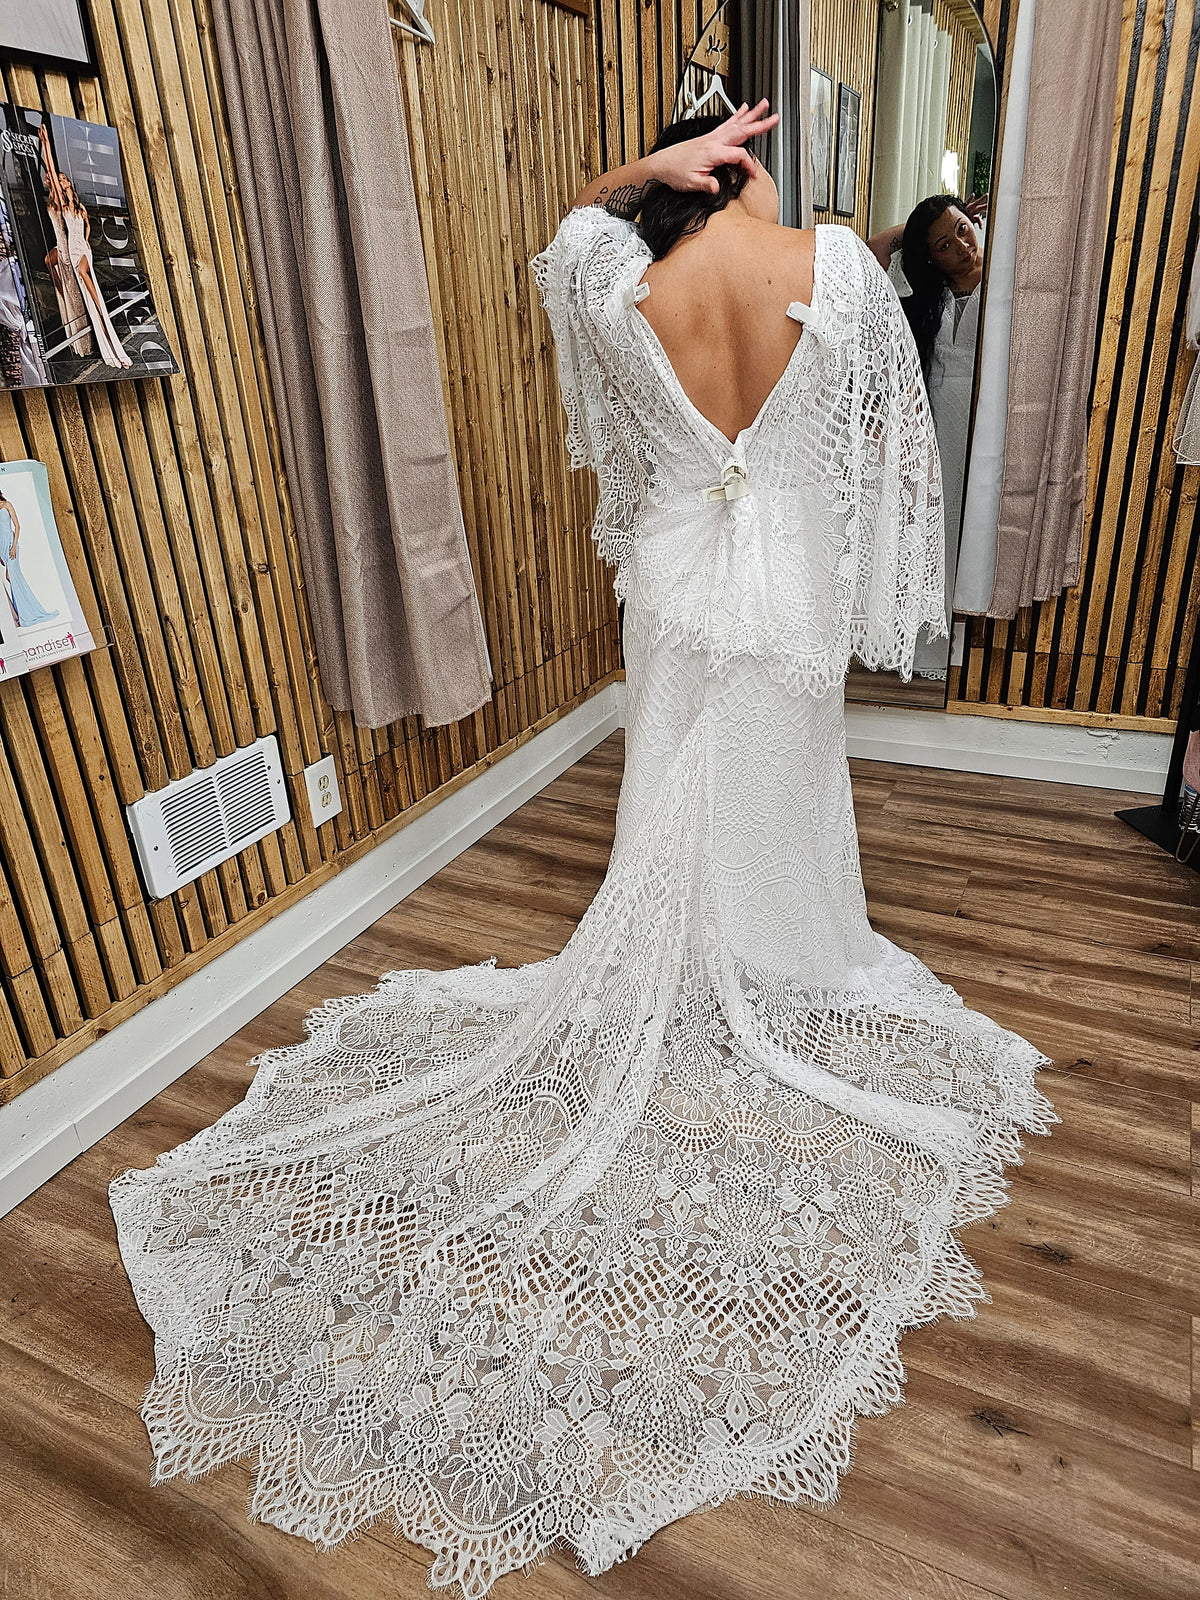 Vintage Lace Boho Mermaid Wedding Dress Long Flutter Sleeves Bridal Gown Fit and Flare Style Open V Shape Back Cape Style Sleeves